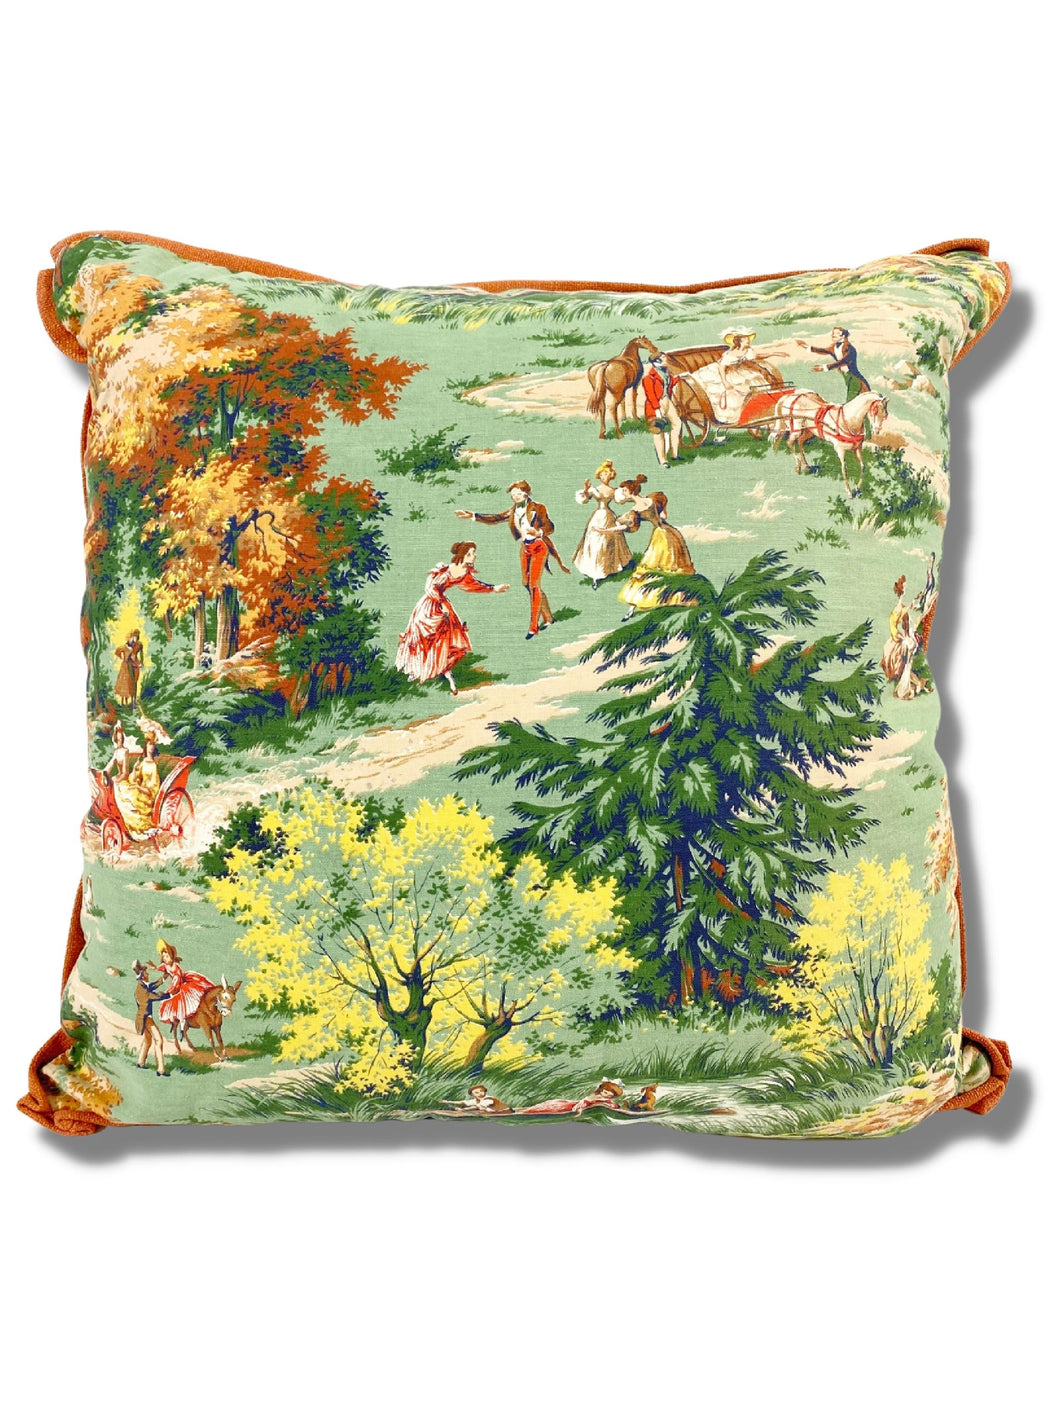 Romantic Pillows in Antique French Toile (Pair)